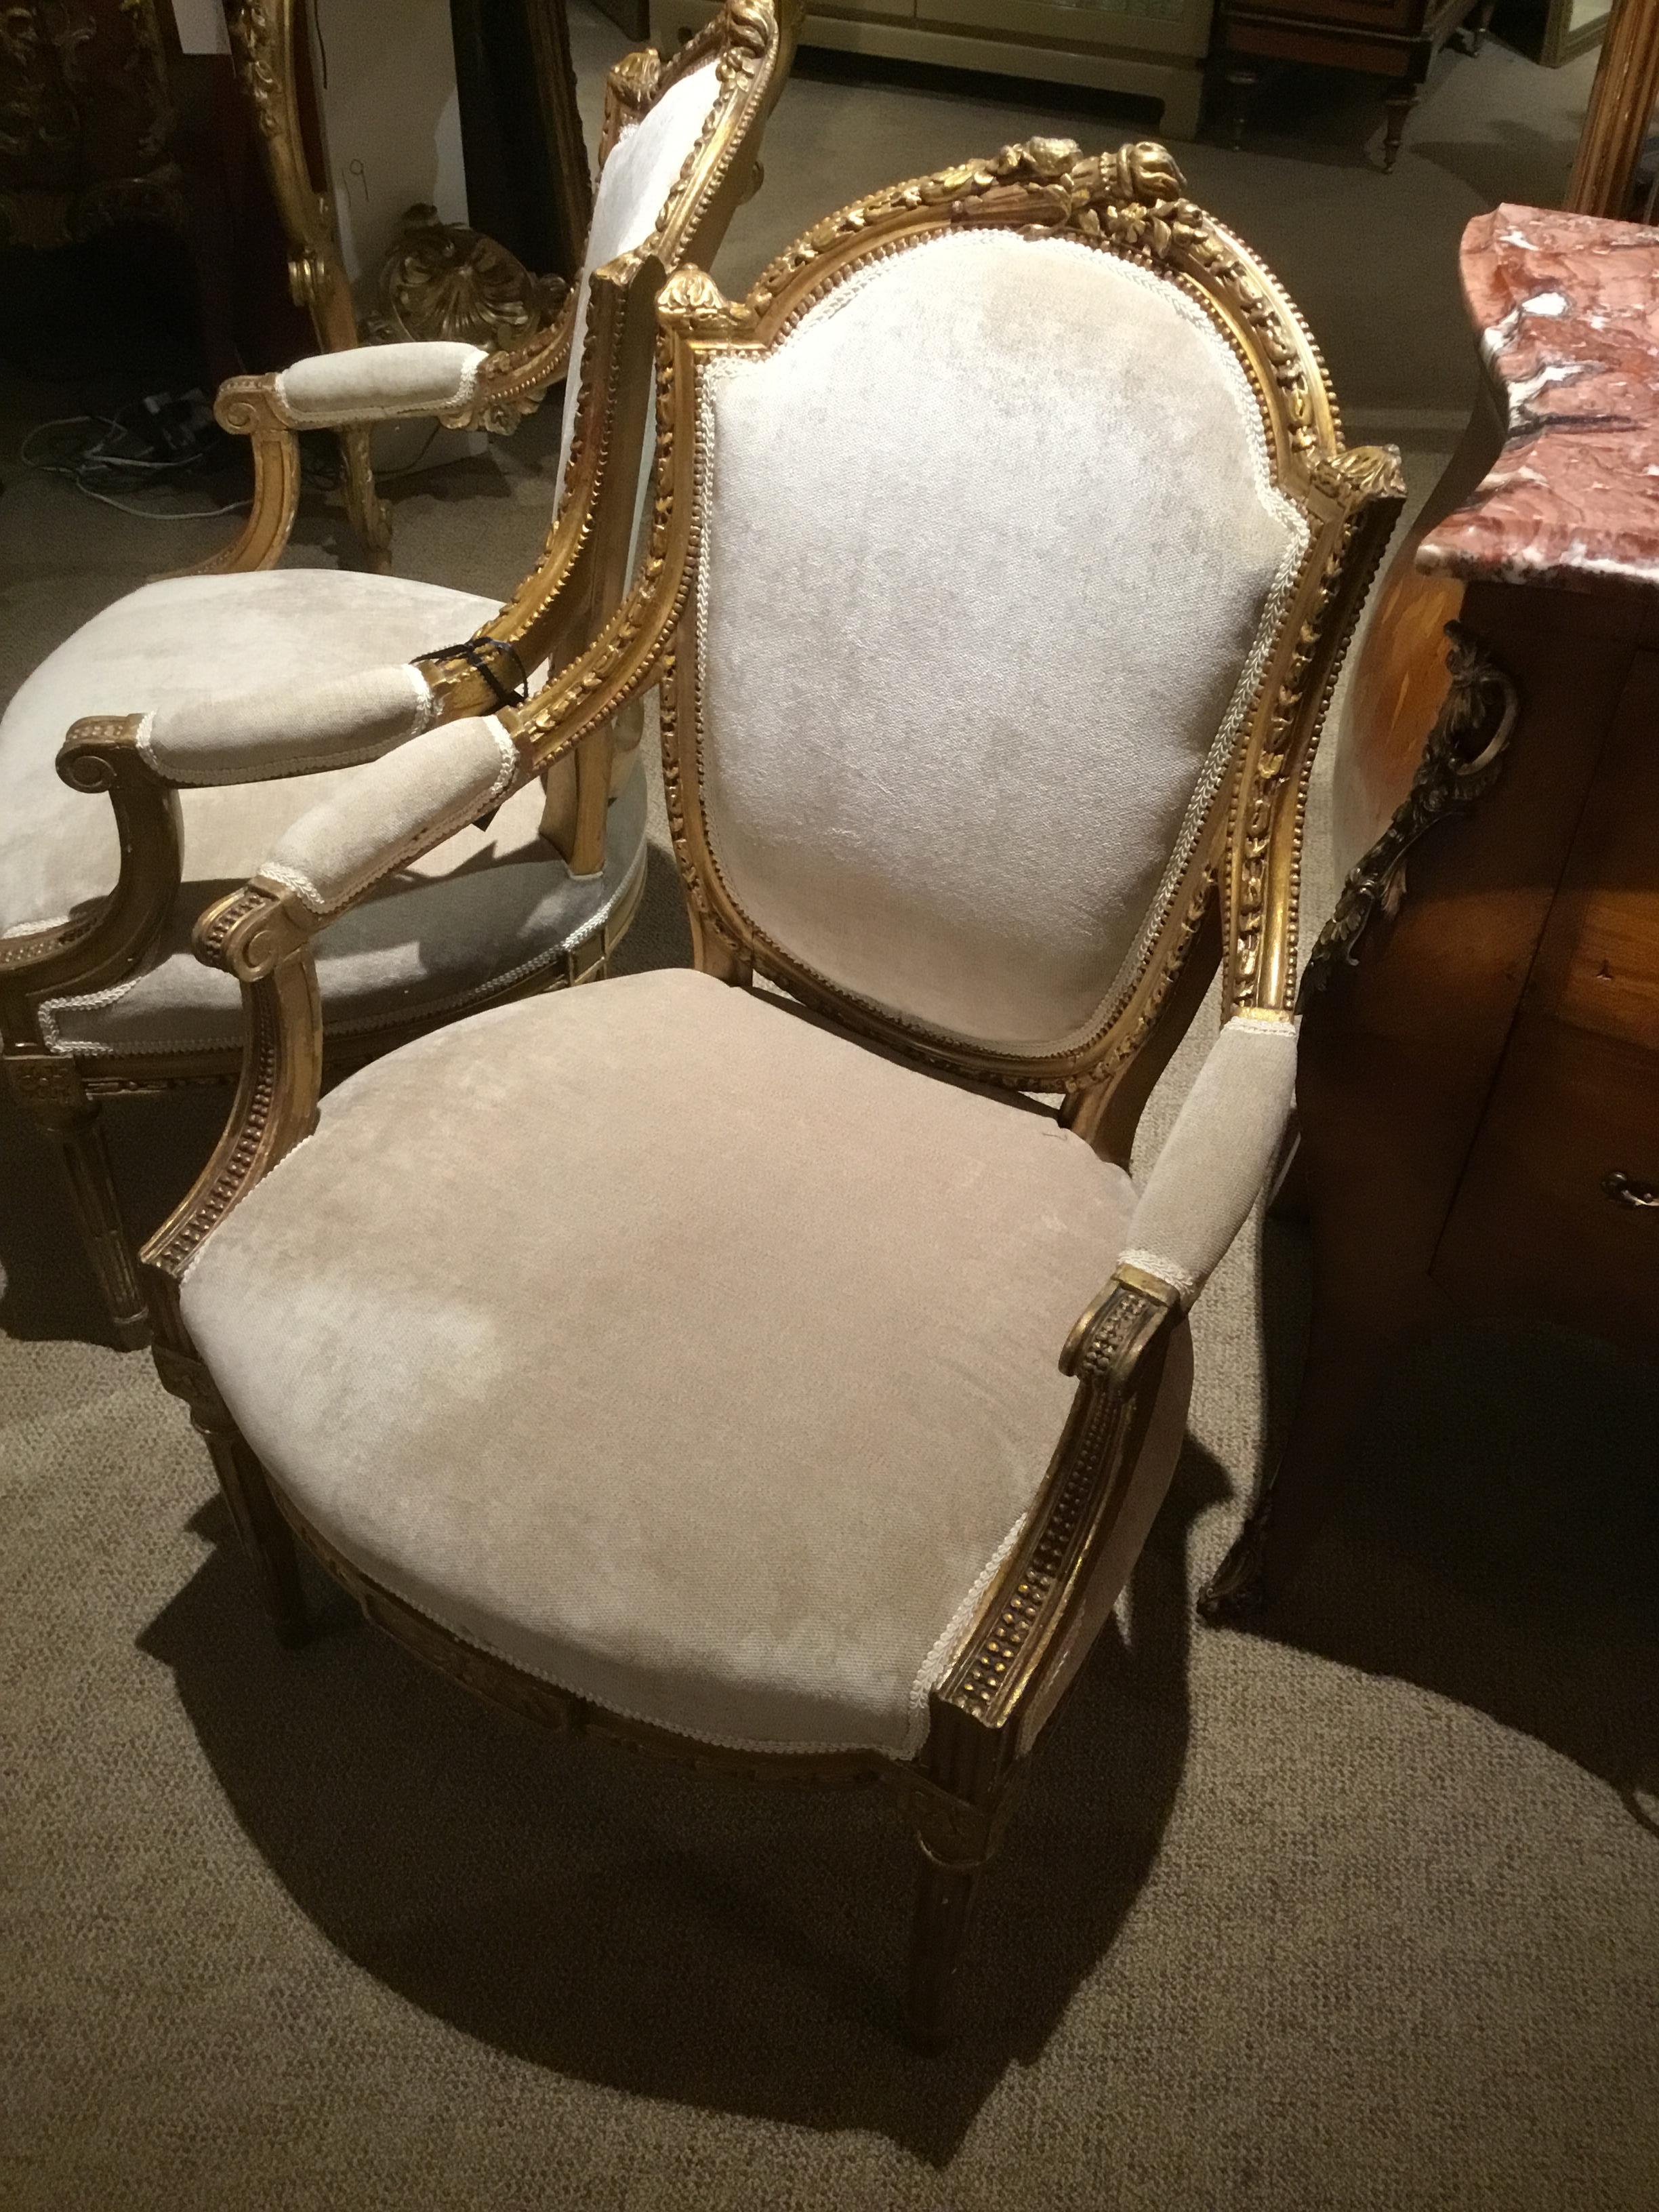 French Louis XVI style giltwood chairs with a flamed torch and foliate 
Design at the crest of these chairs. A carved and reeded leg is featured.